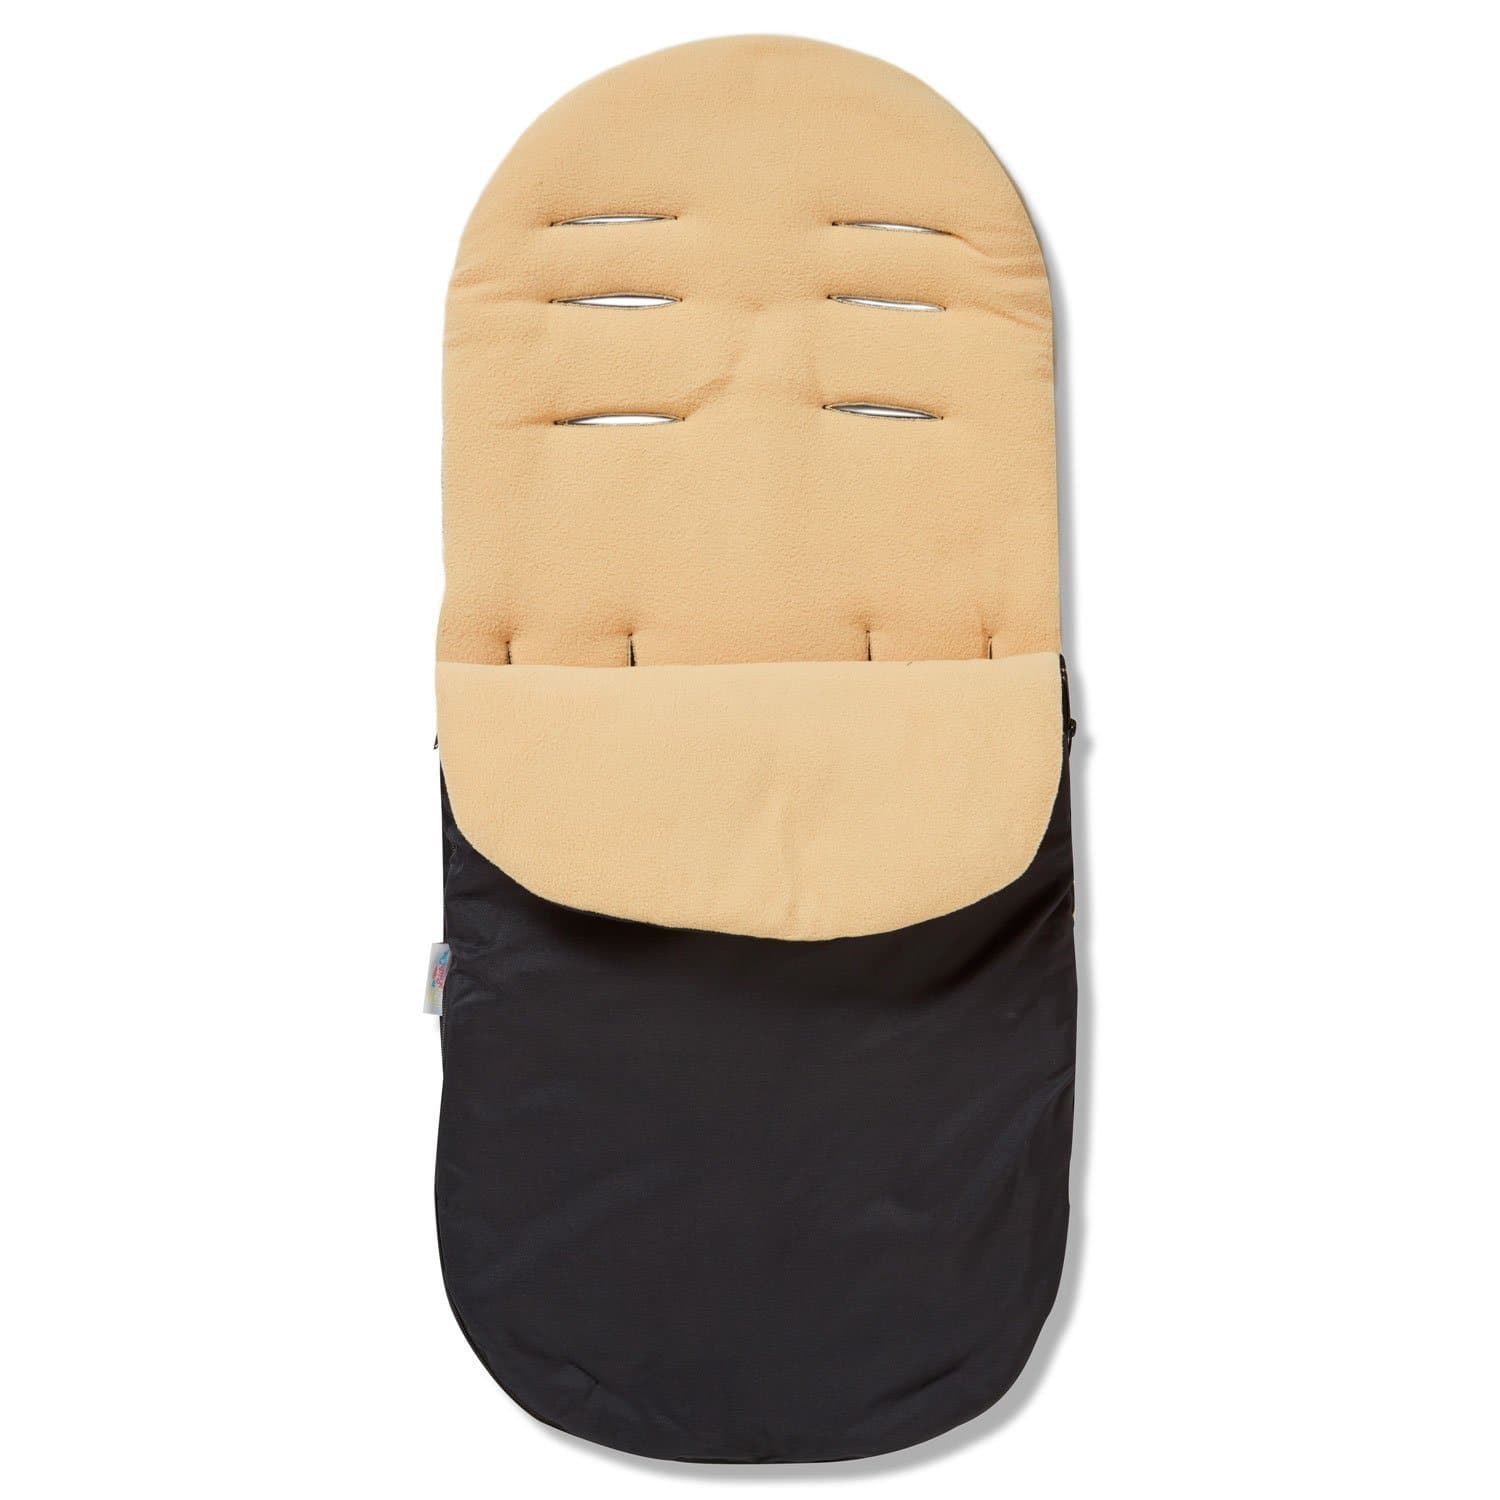 Footmuff / Cosy Toes Compatible with Babyzen - For Your Little One